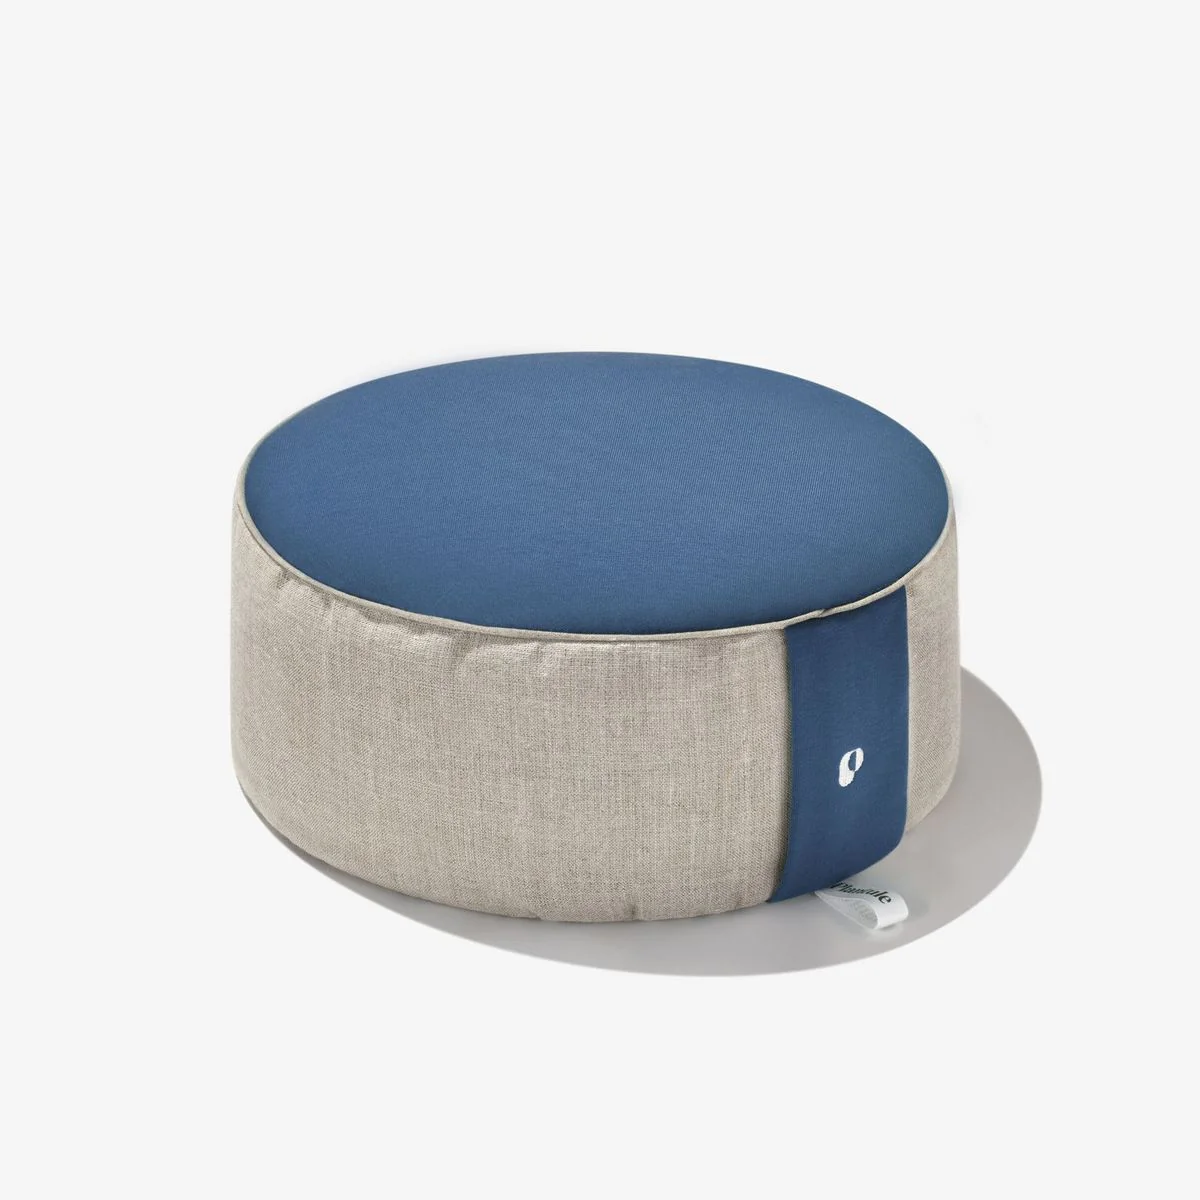 Blue Eco-friendly Meditation Seat: Comfortable Support